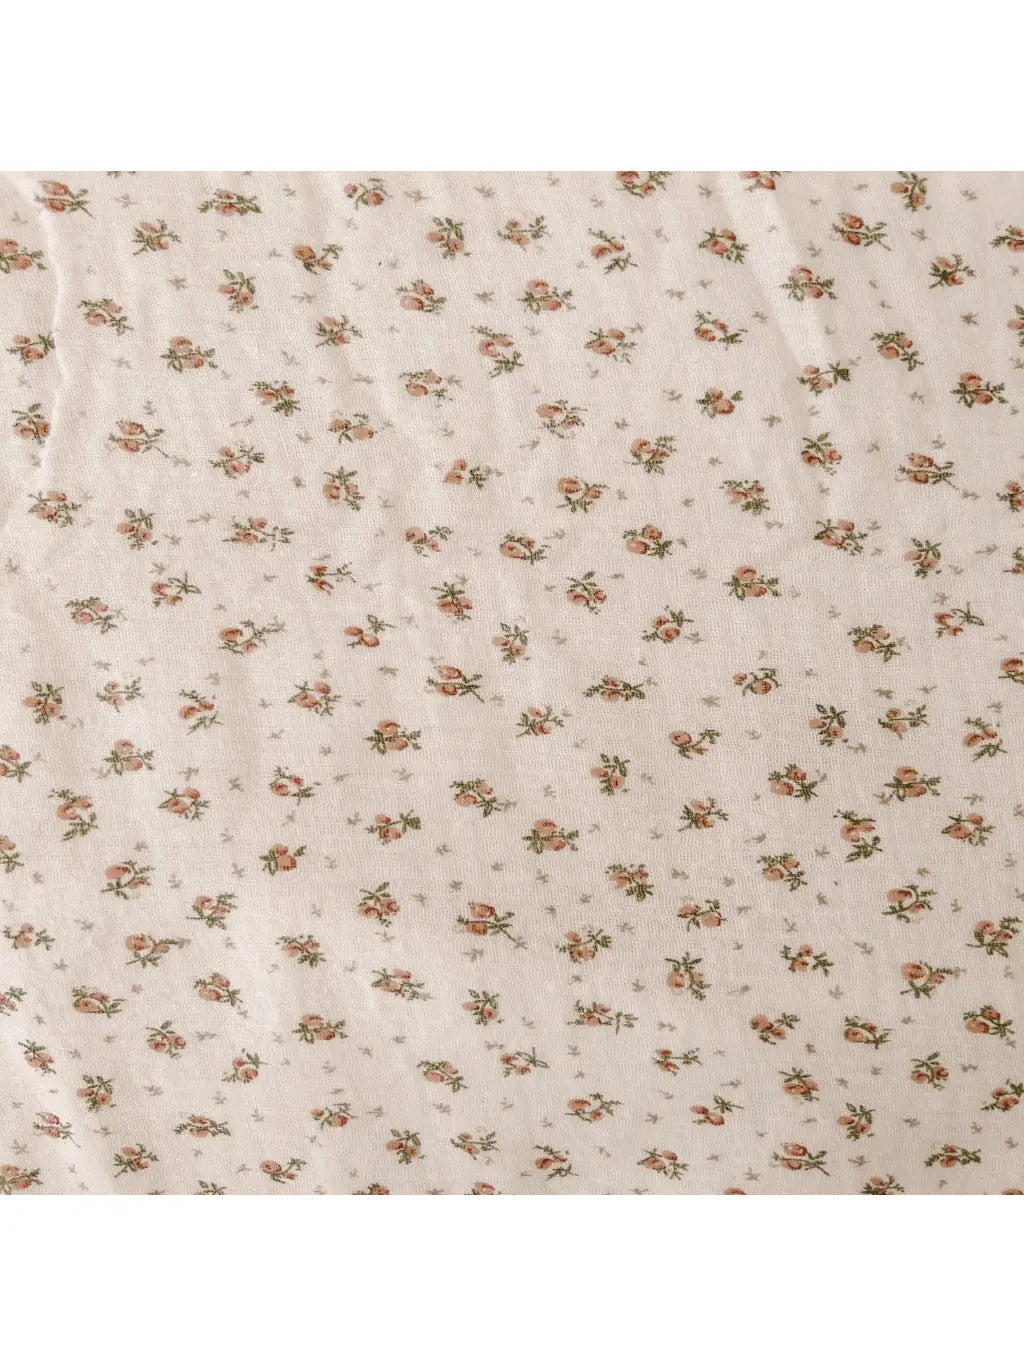 Fitted Cot Sheet in Rosie Floral